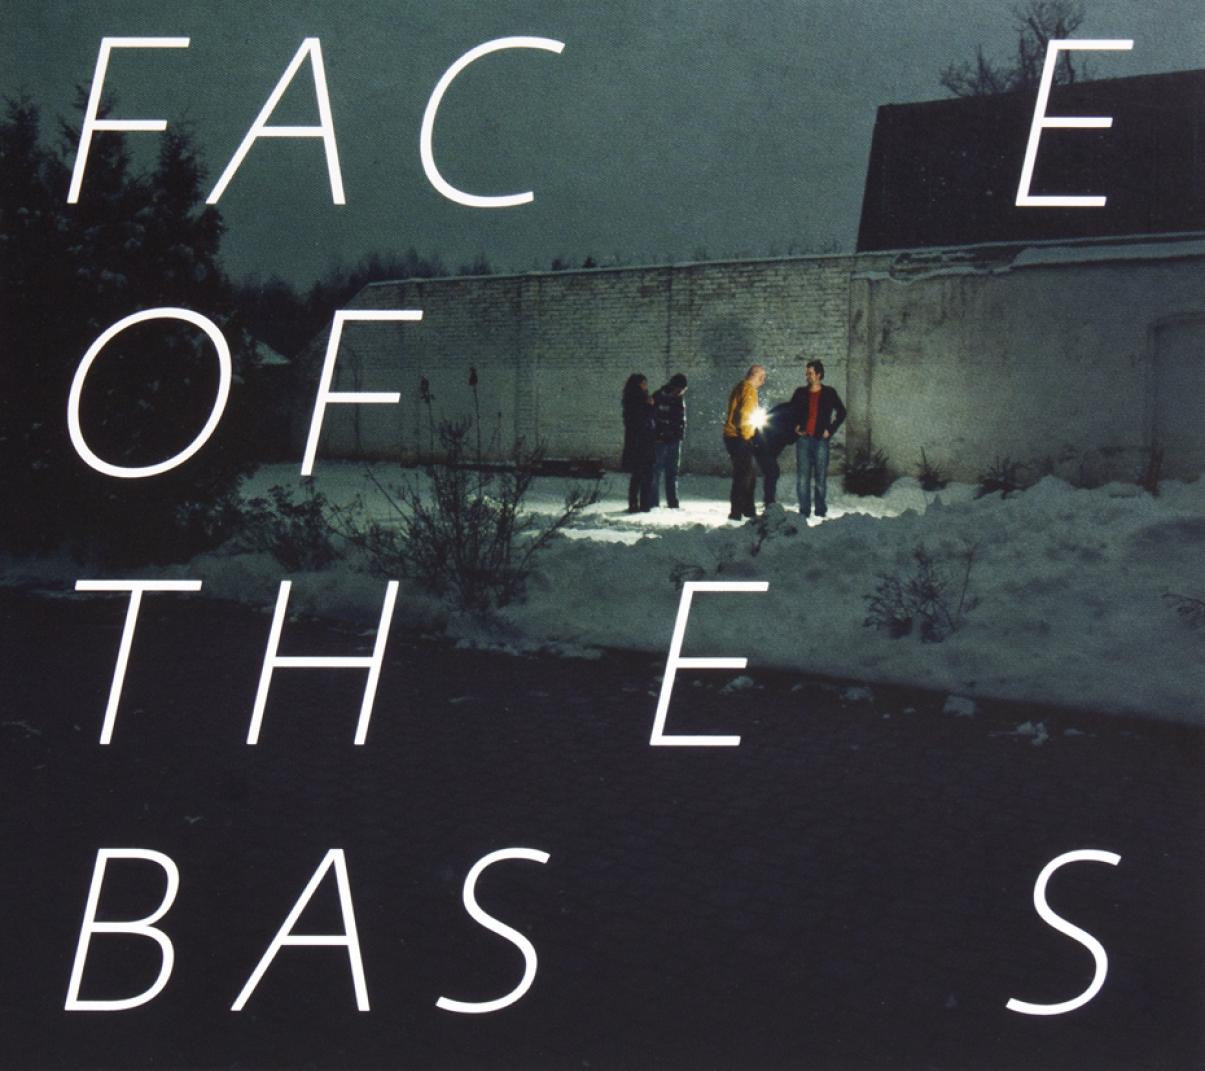 Face of the Bass